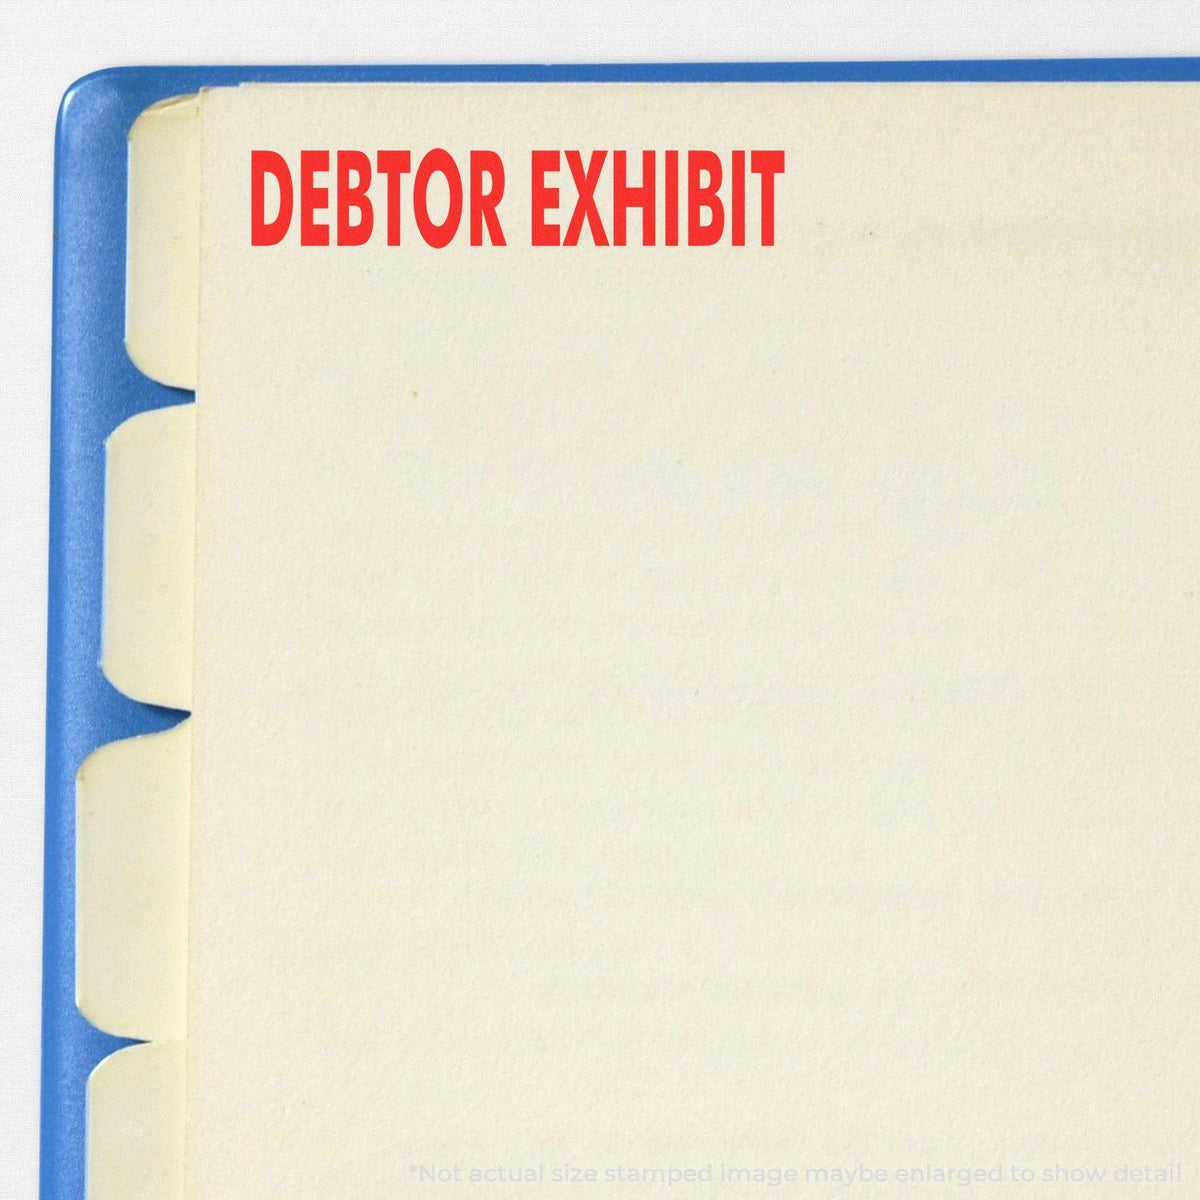 In Use Debtor Exhibit Rubber Stamp Image